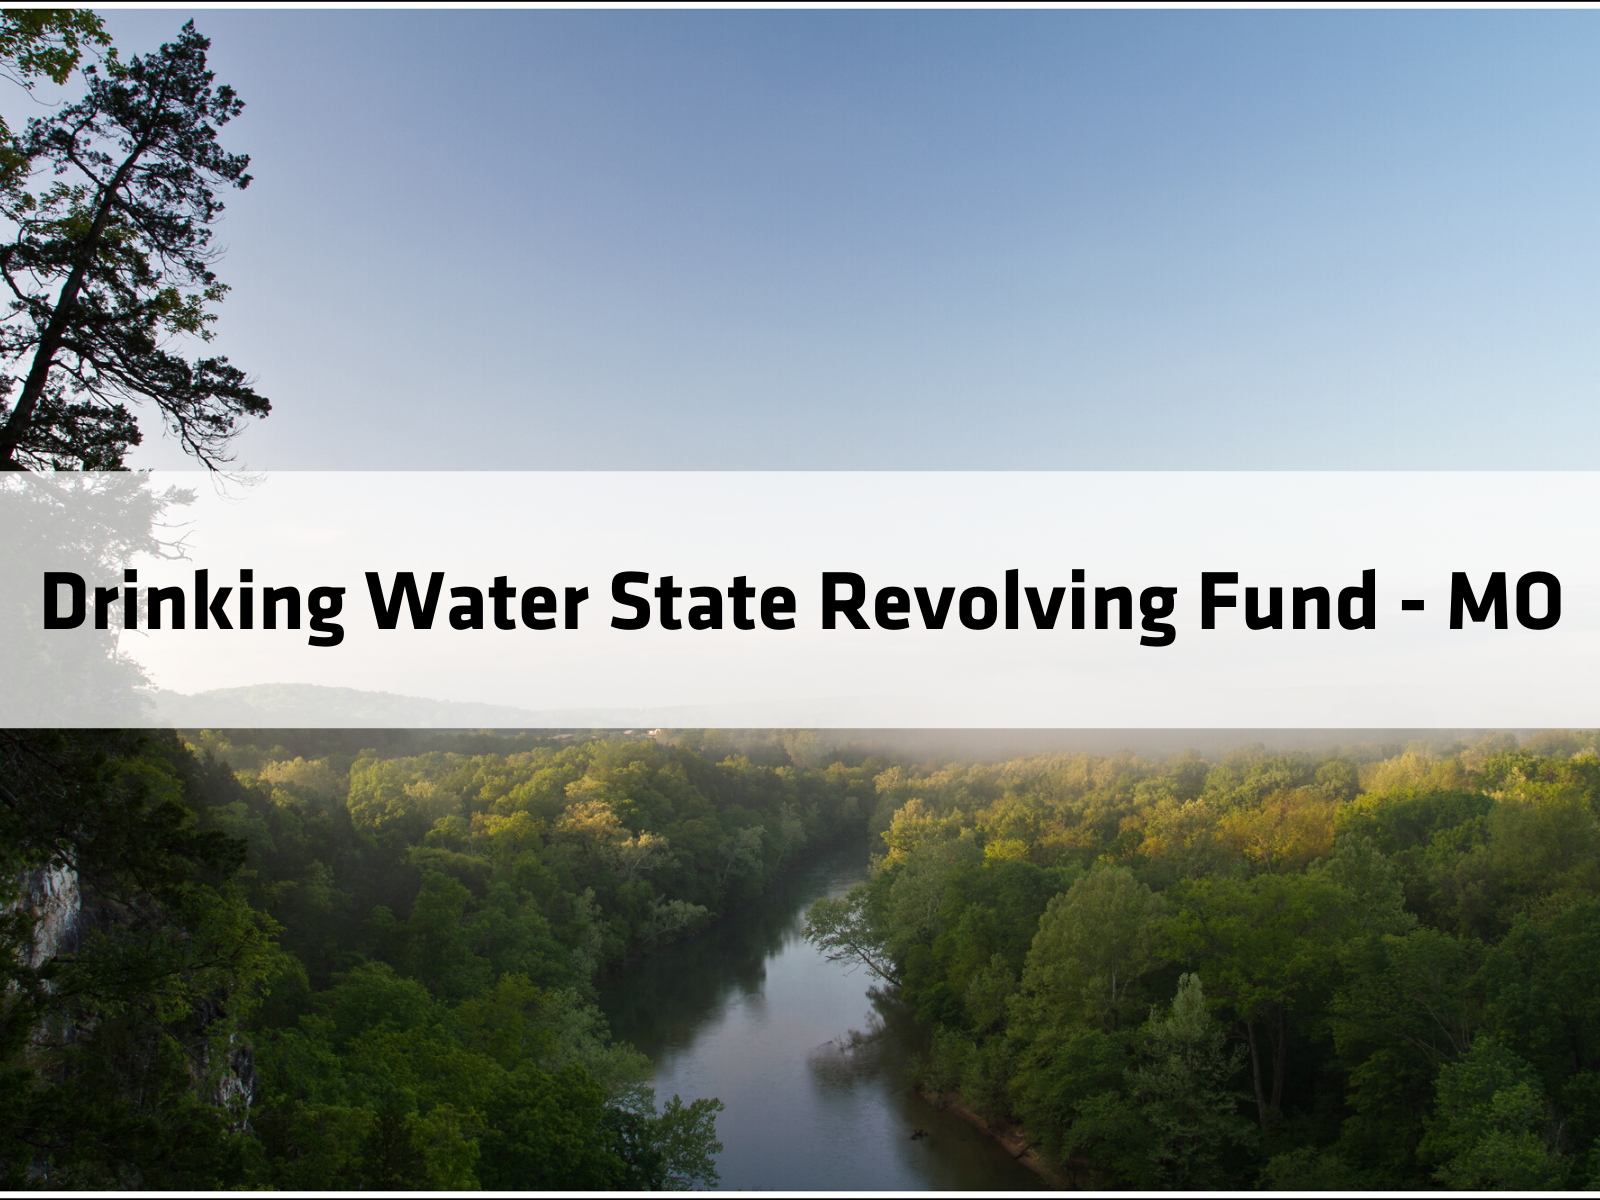 Drinking Water State Revolving Fund - MO